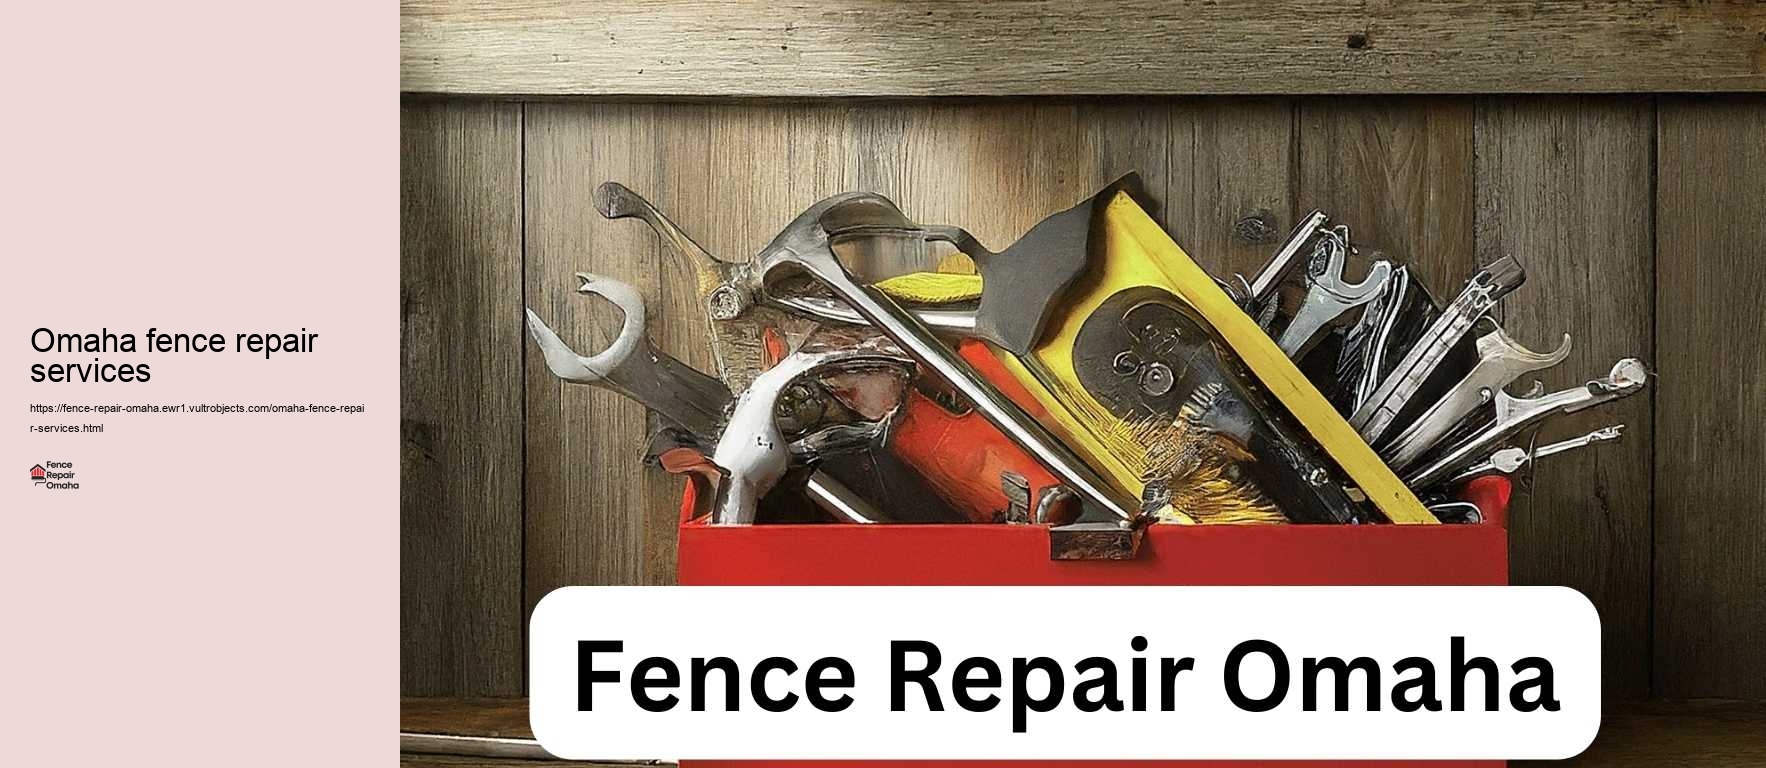 Omaha fence repair services